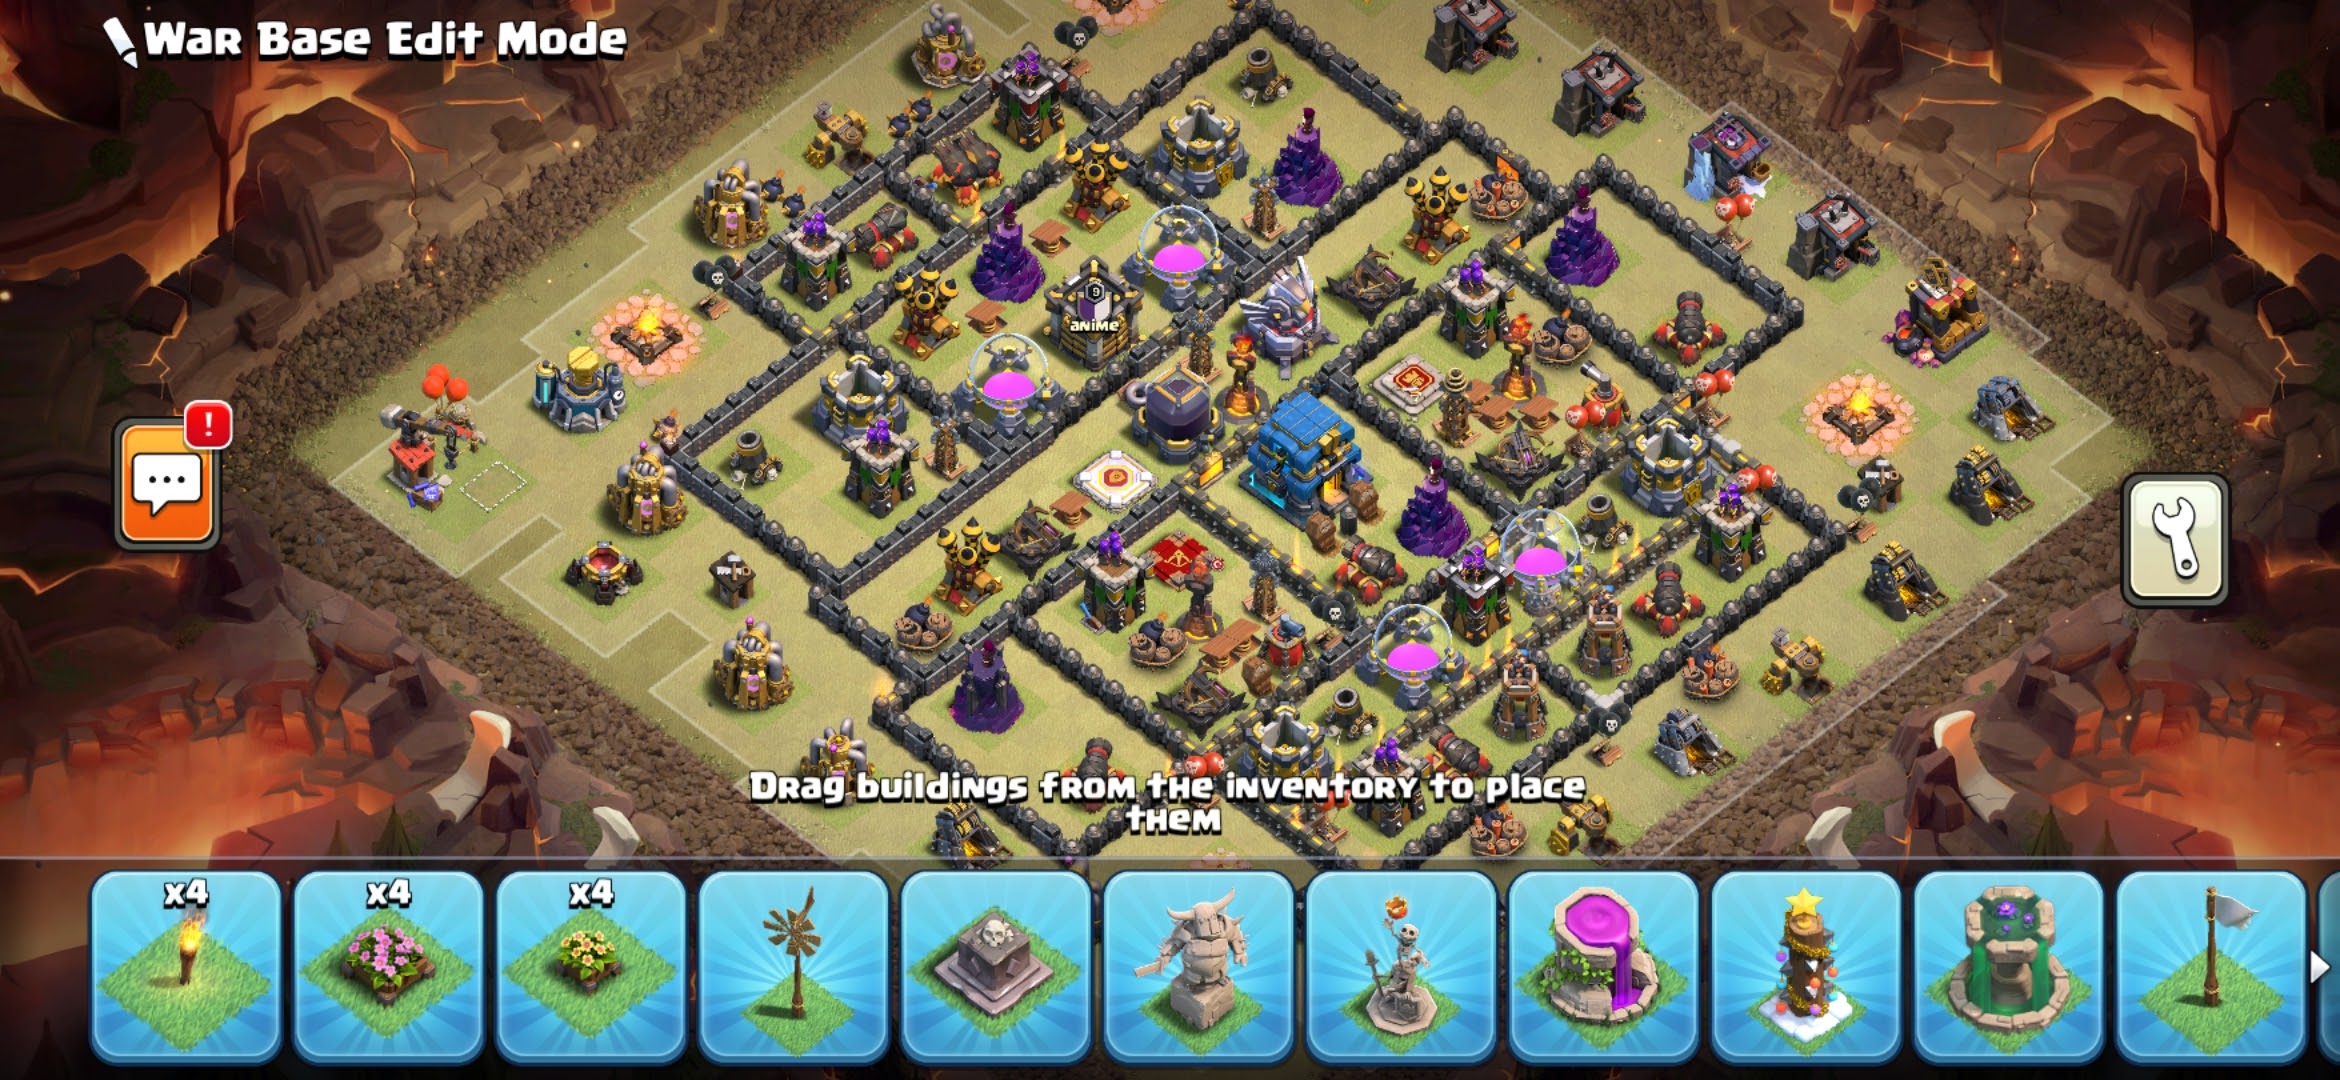 How to Make Best Layout in Clash of Clans for War